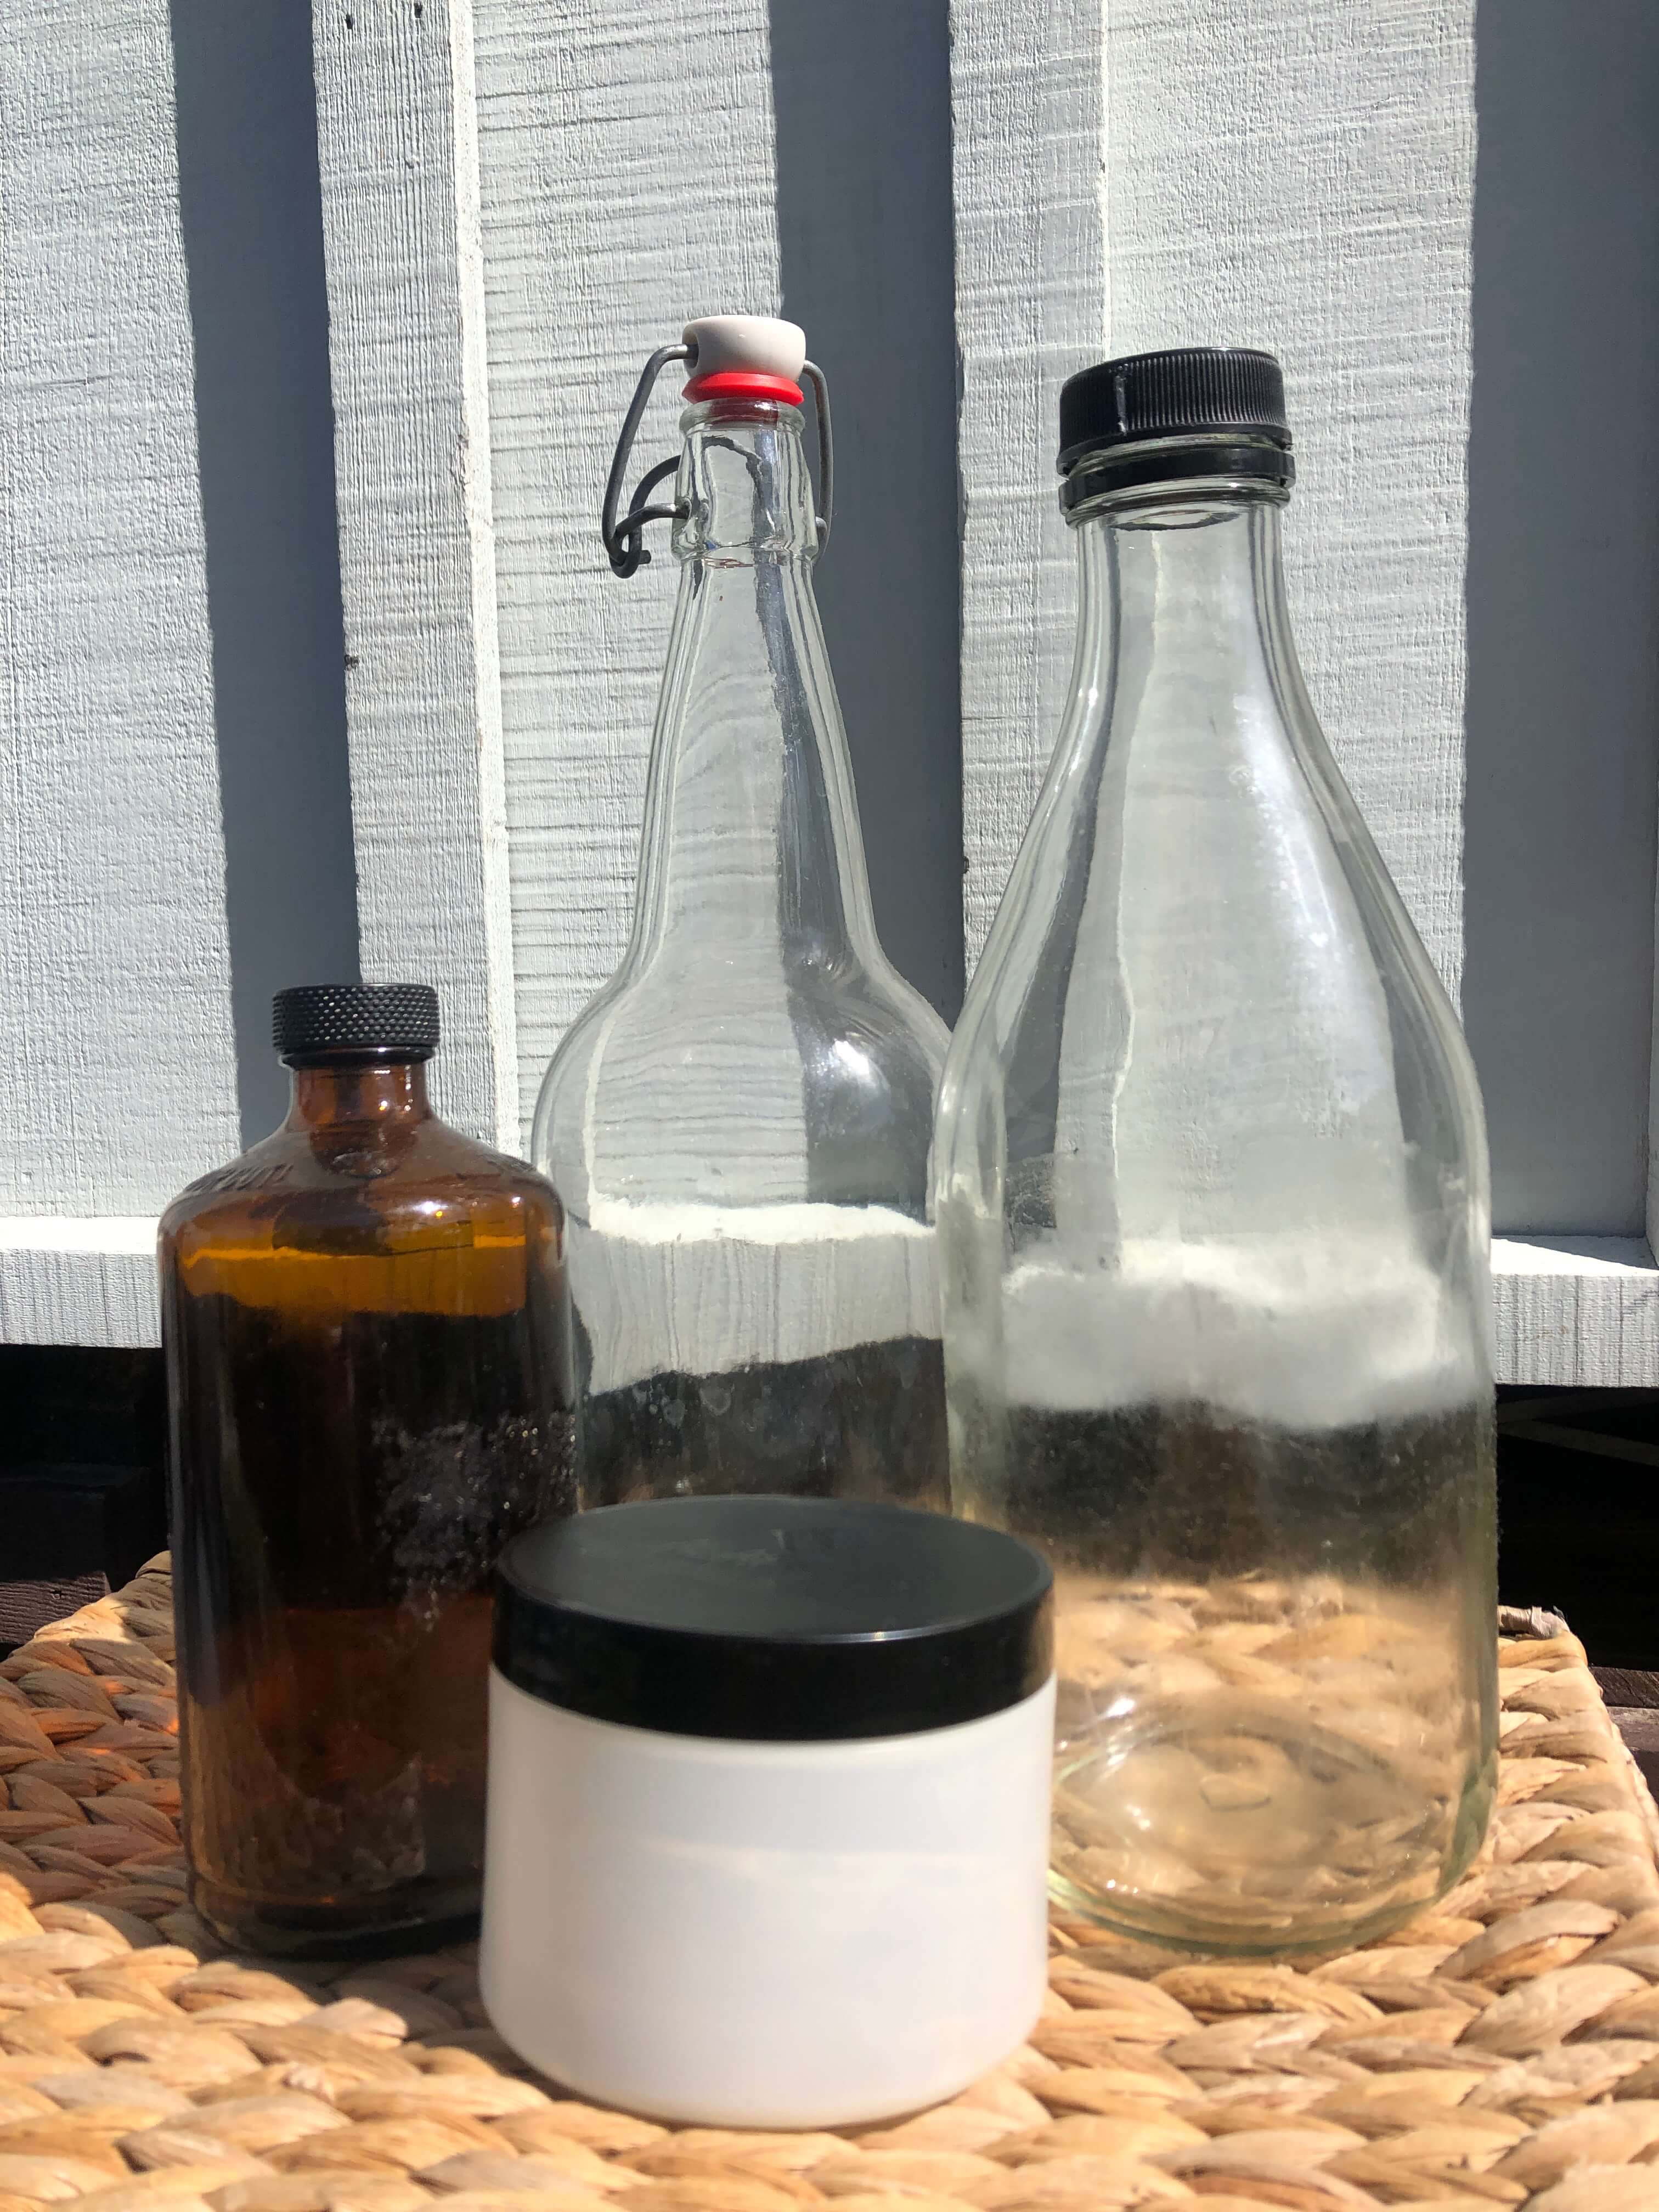 repurposed bottles I will use for my zero waste cleaning products